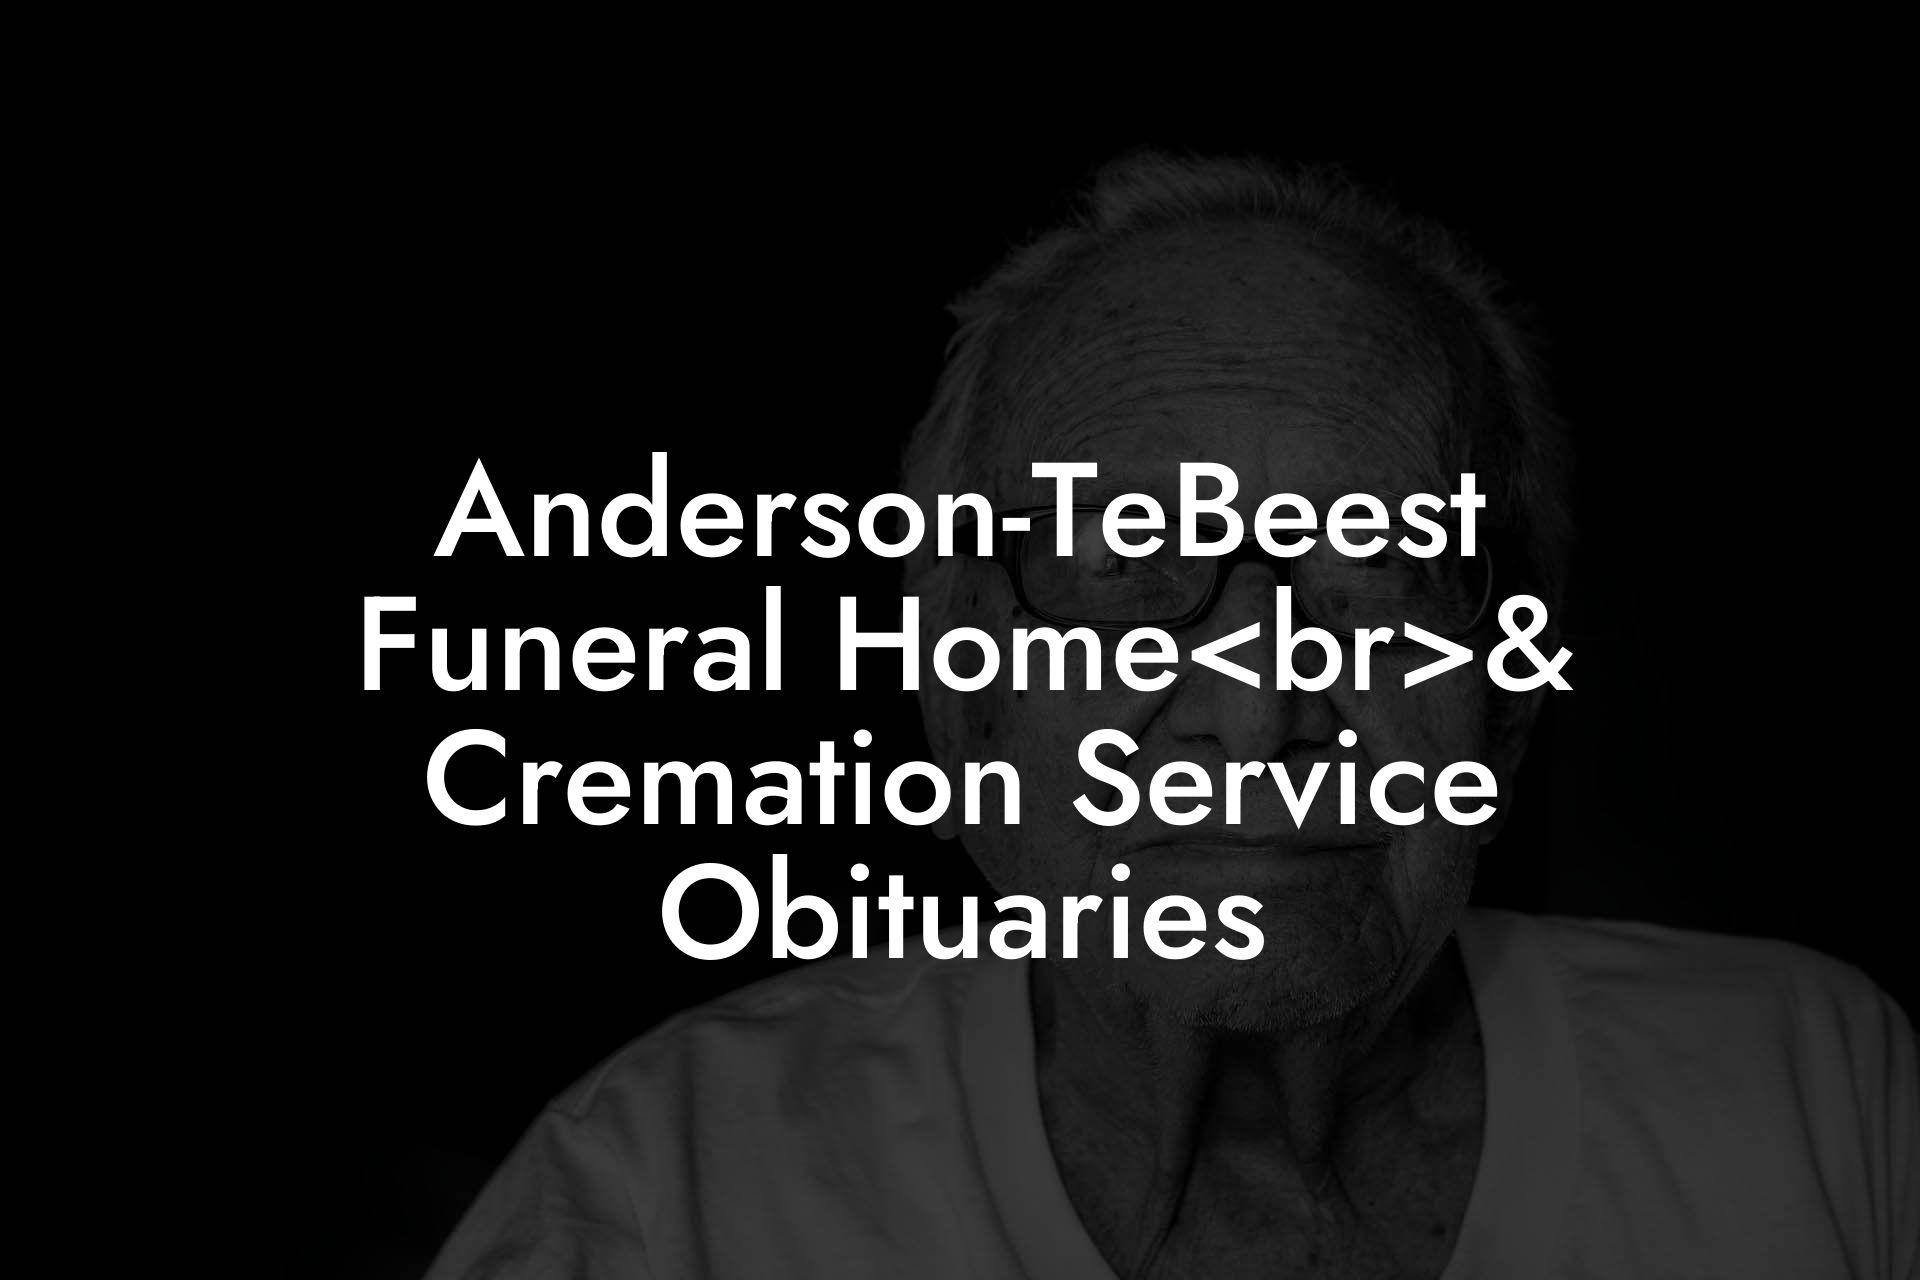 Anderson-TeBeest Funeral Home& Cremation Service Obituaries